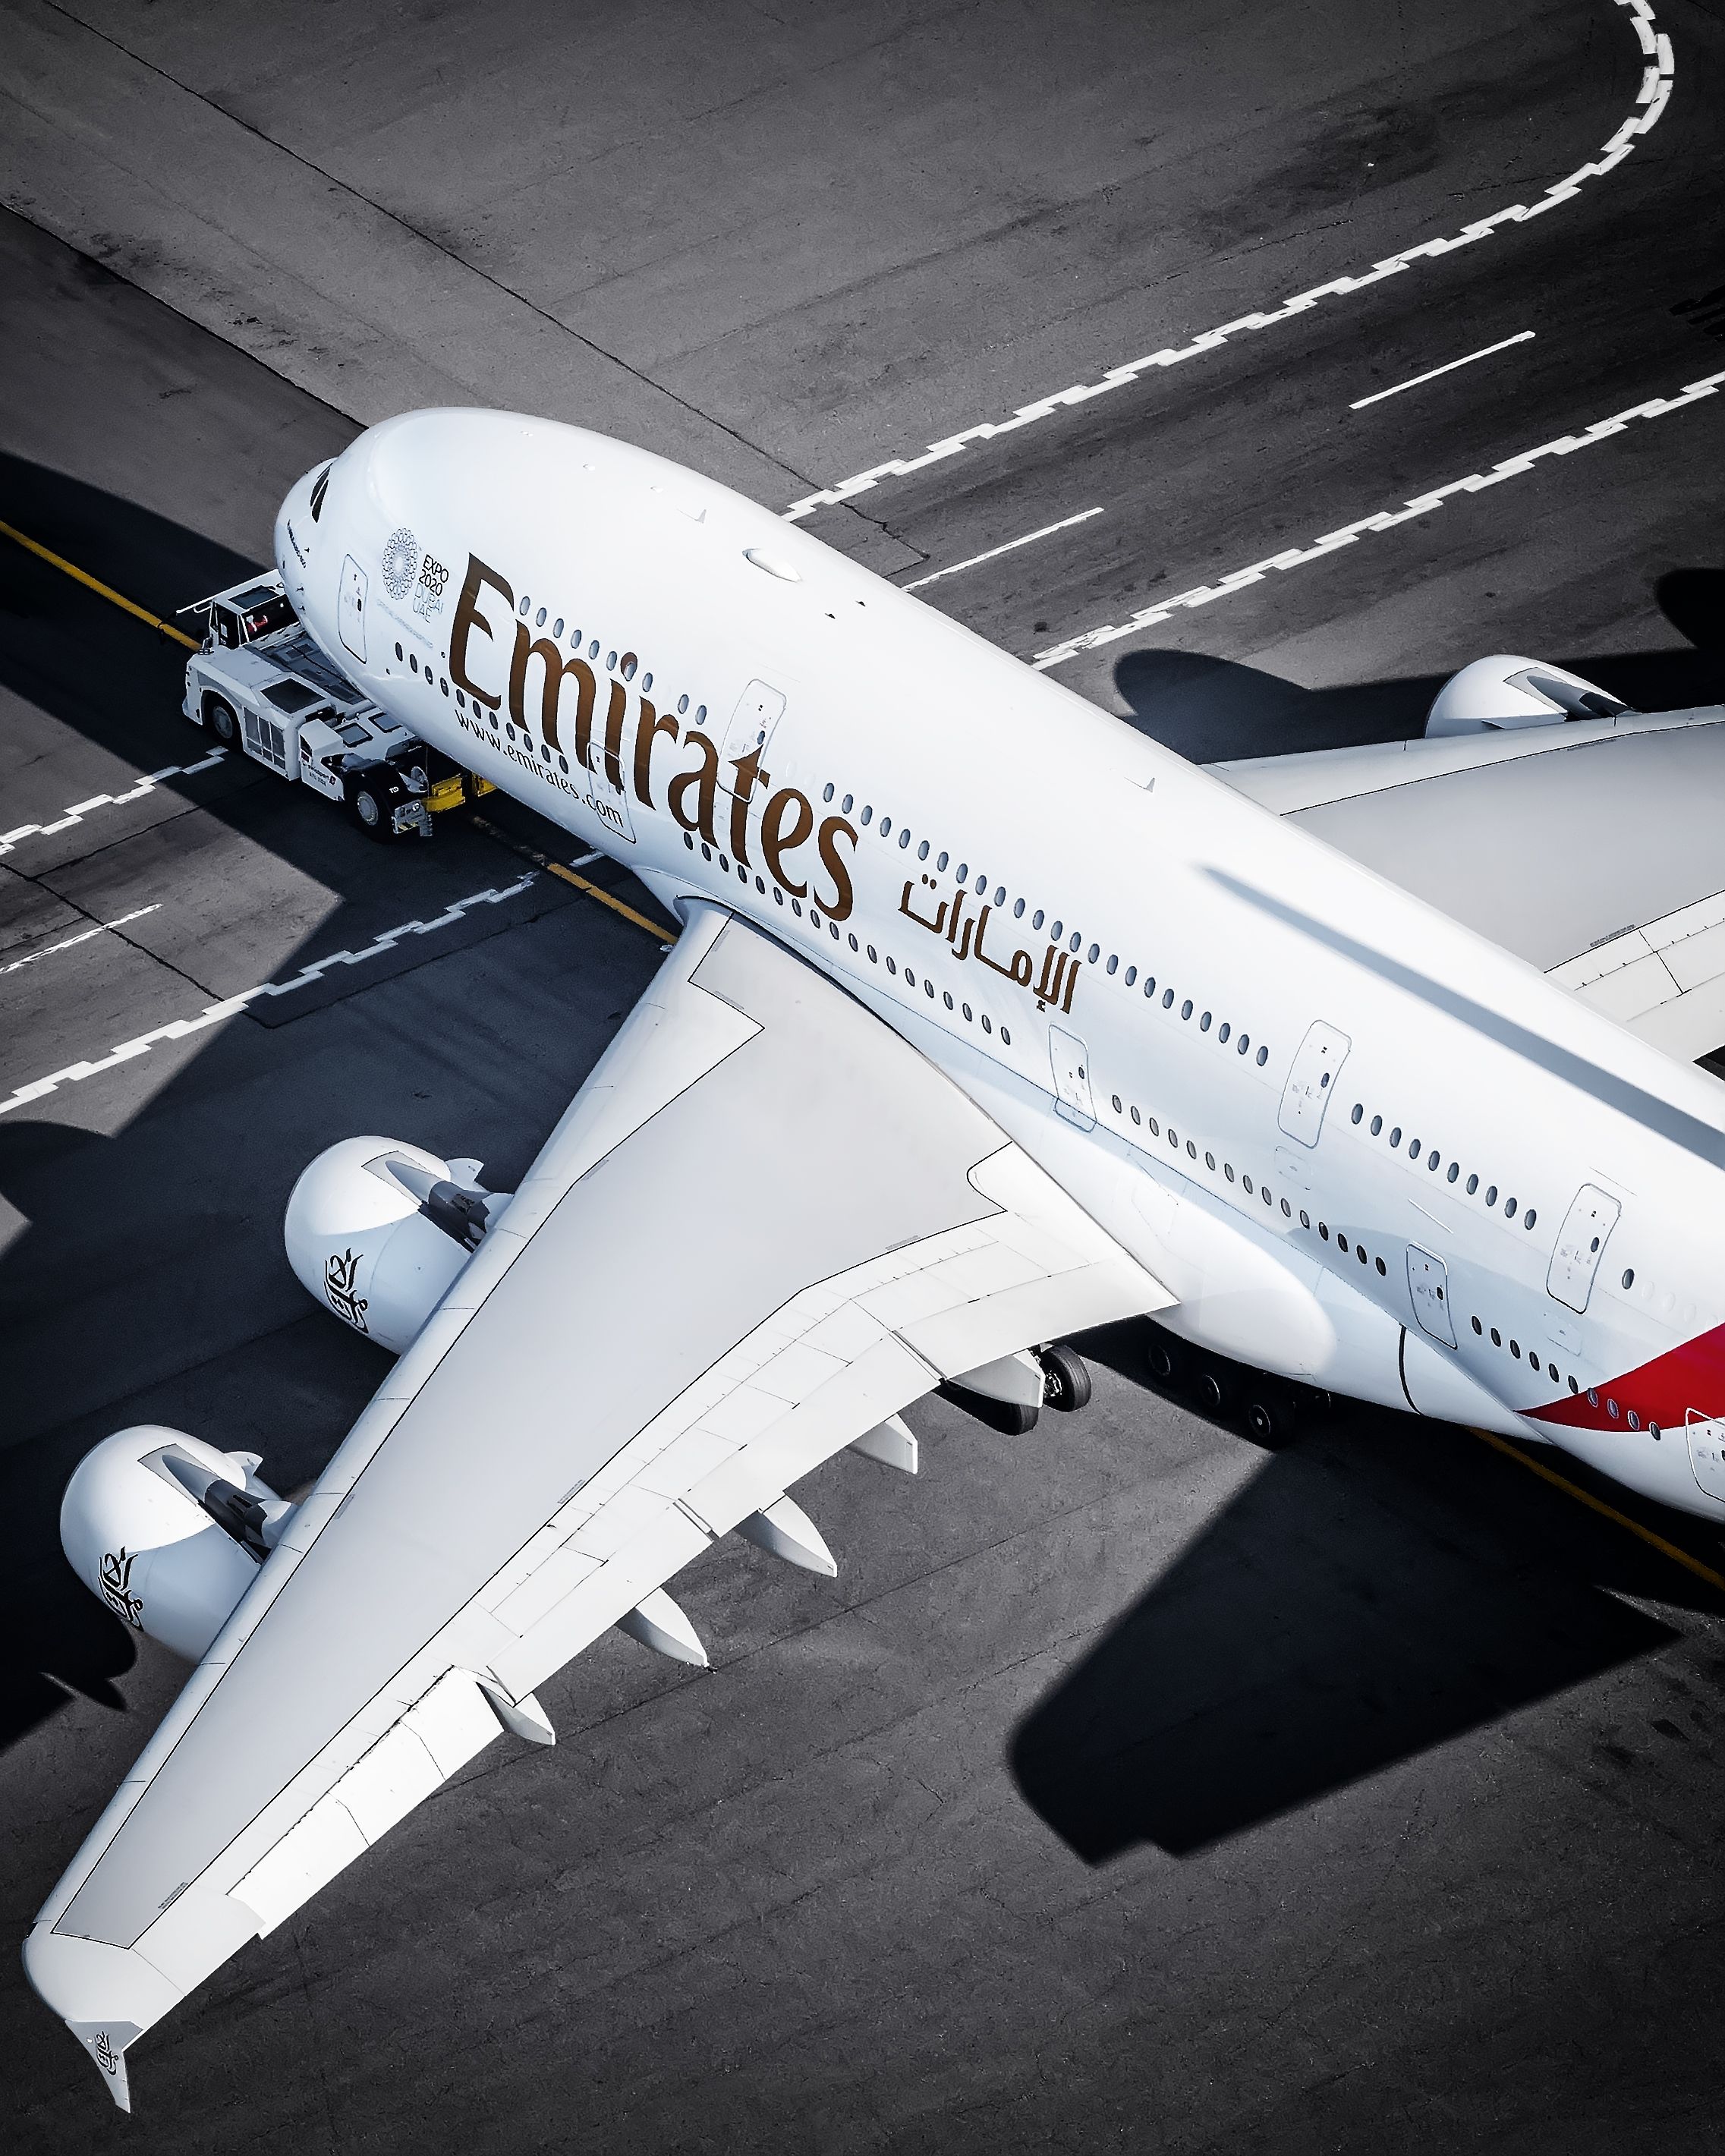 AN Emirates Airbus A380 on an airport apron.